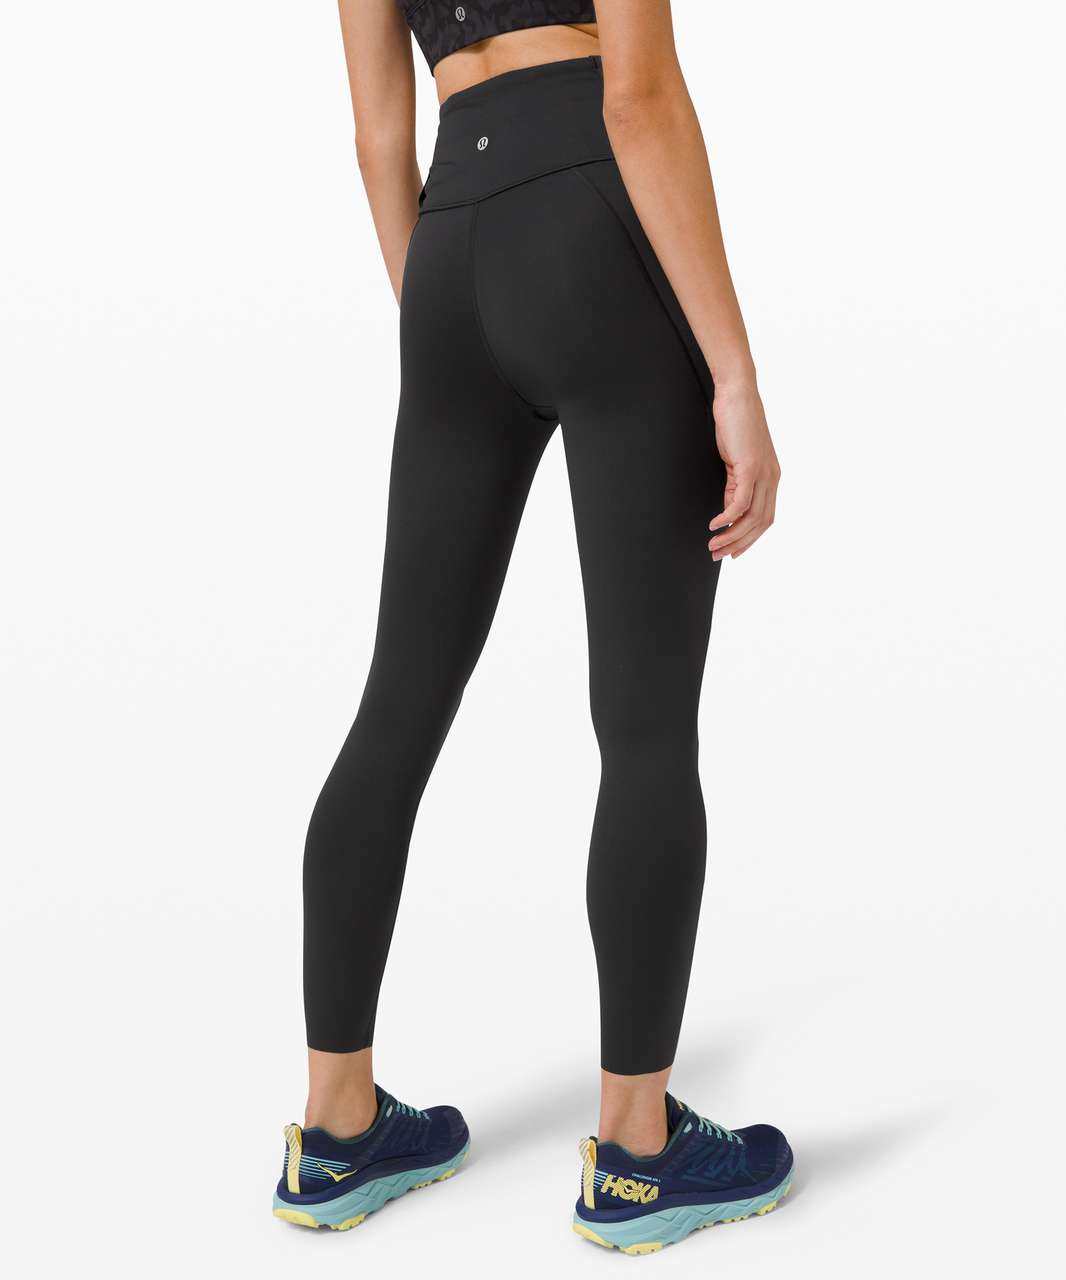 Lululemon Fast and Free High-Rise Tight 25 New with Tag Size 4 - $108 New  With Tags - From Annerys